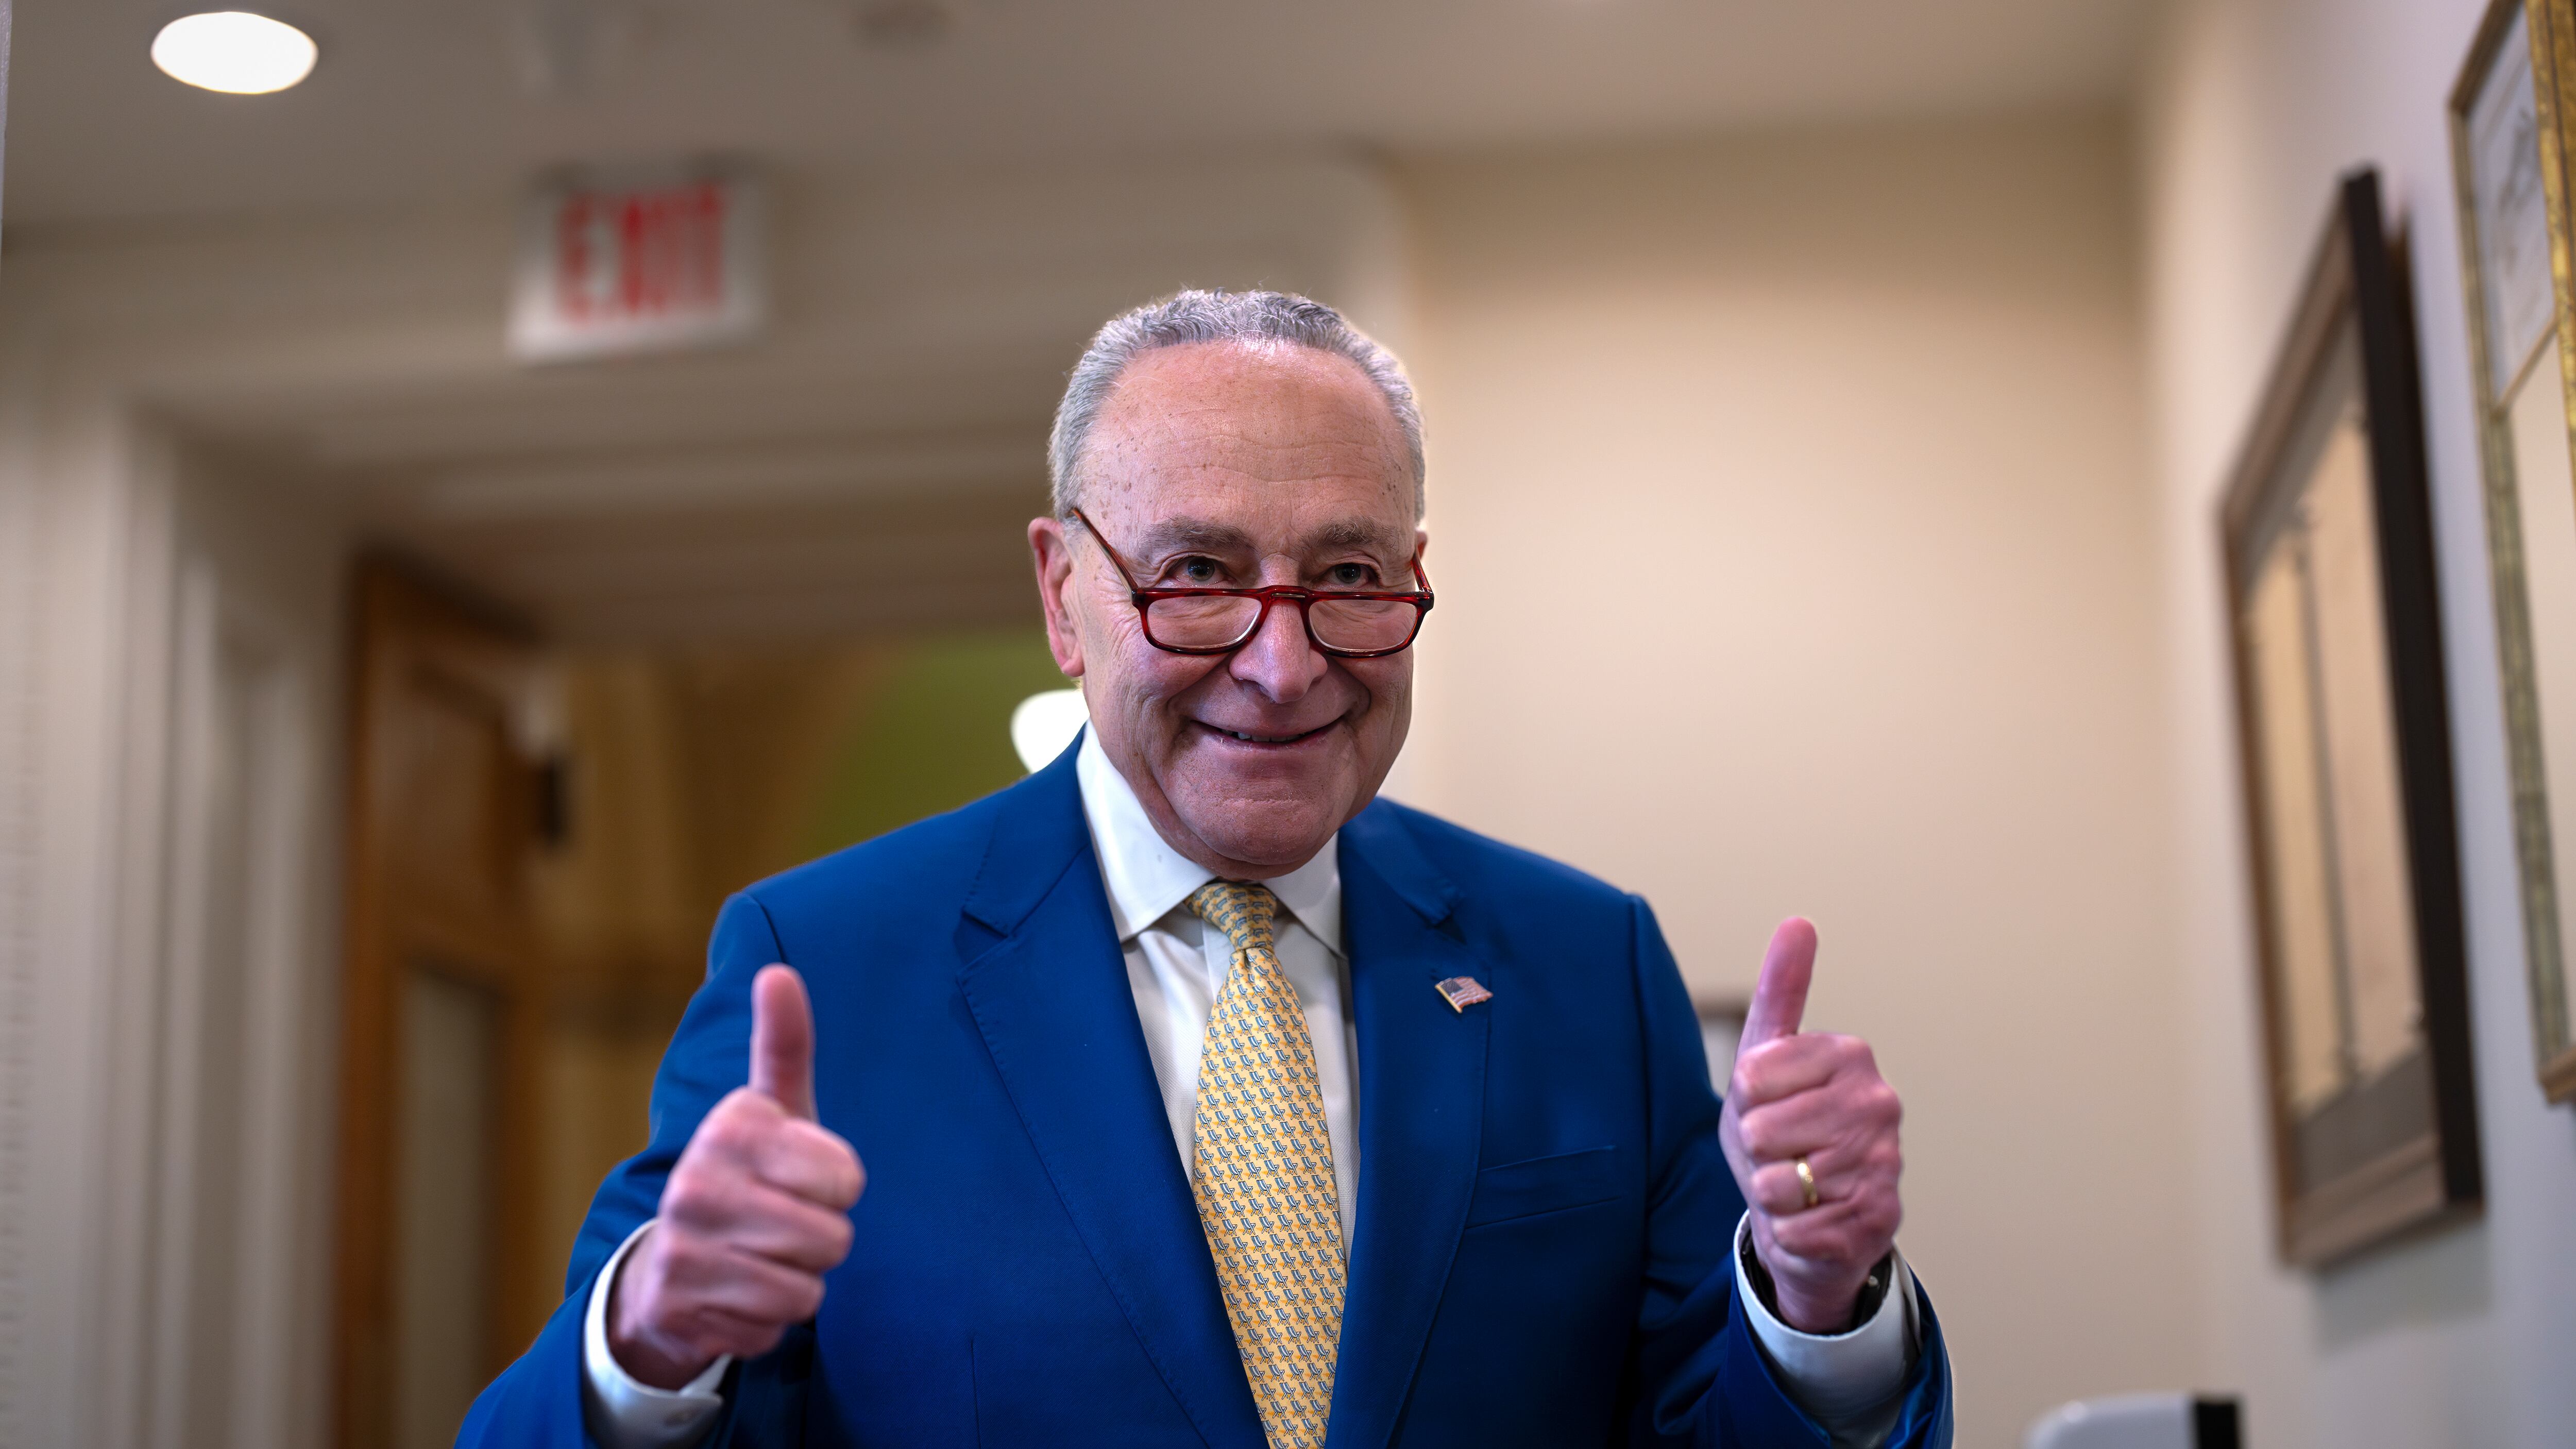 Senate majority leader Chuck Schumer signals success to reporters after a divided Senate passed an emergency spending package to provide send military aid to Ukraine and Israel (J. Scott Applewhite/AP)